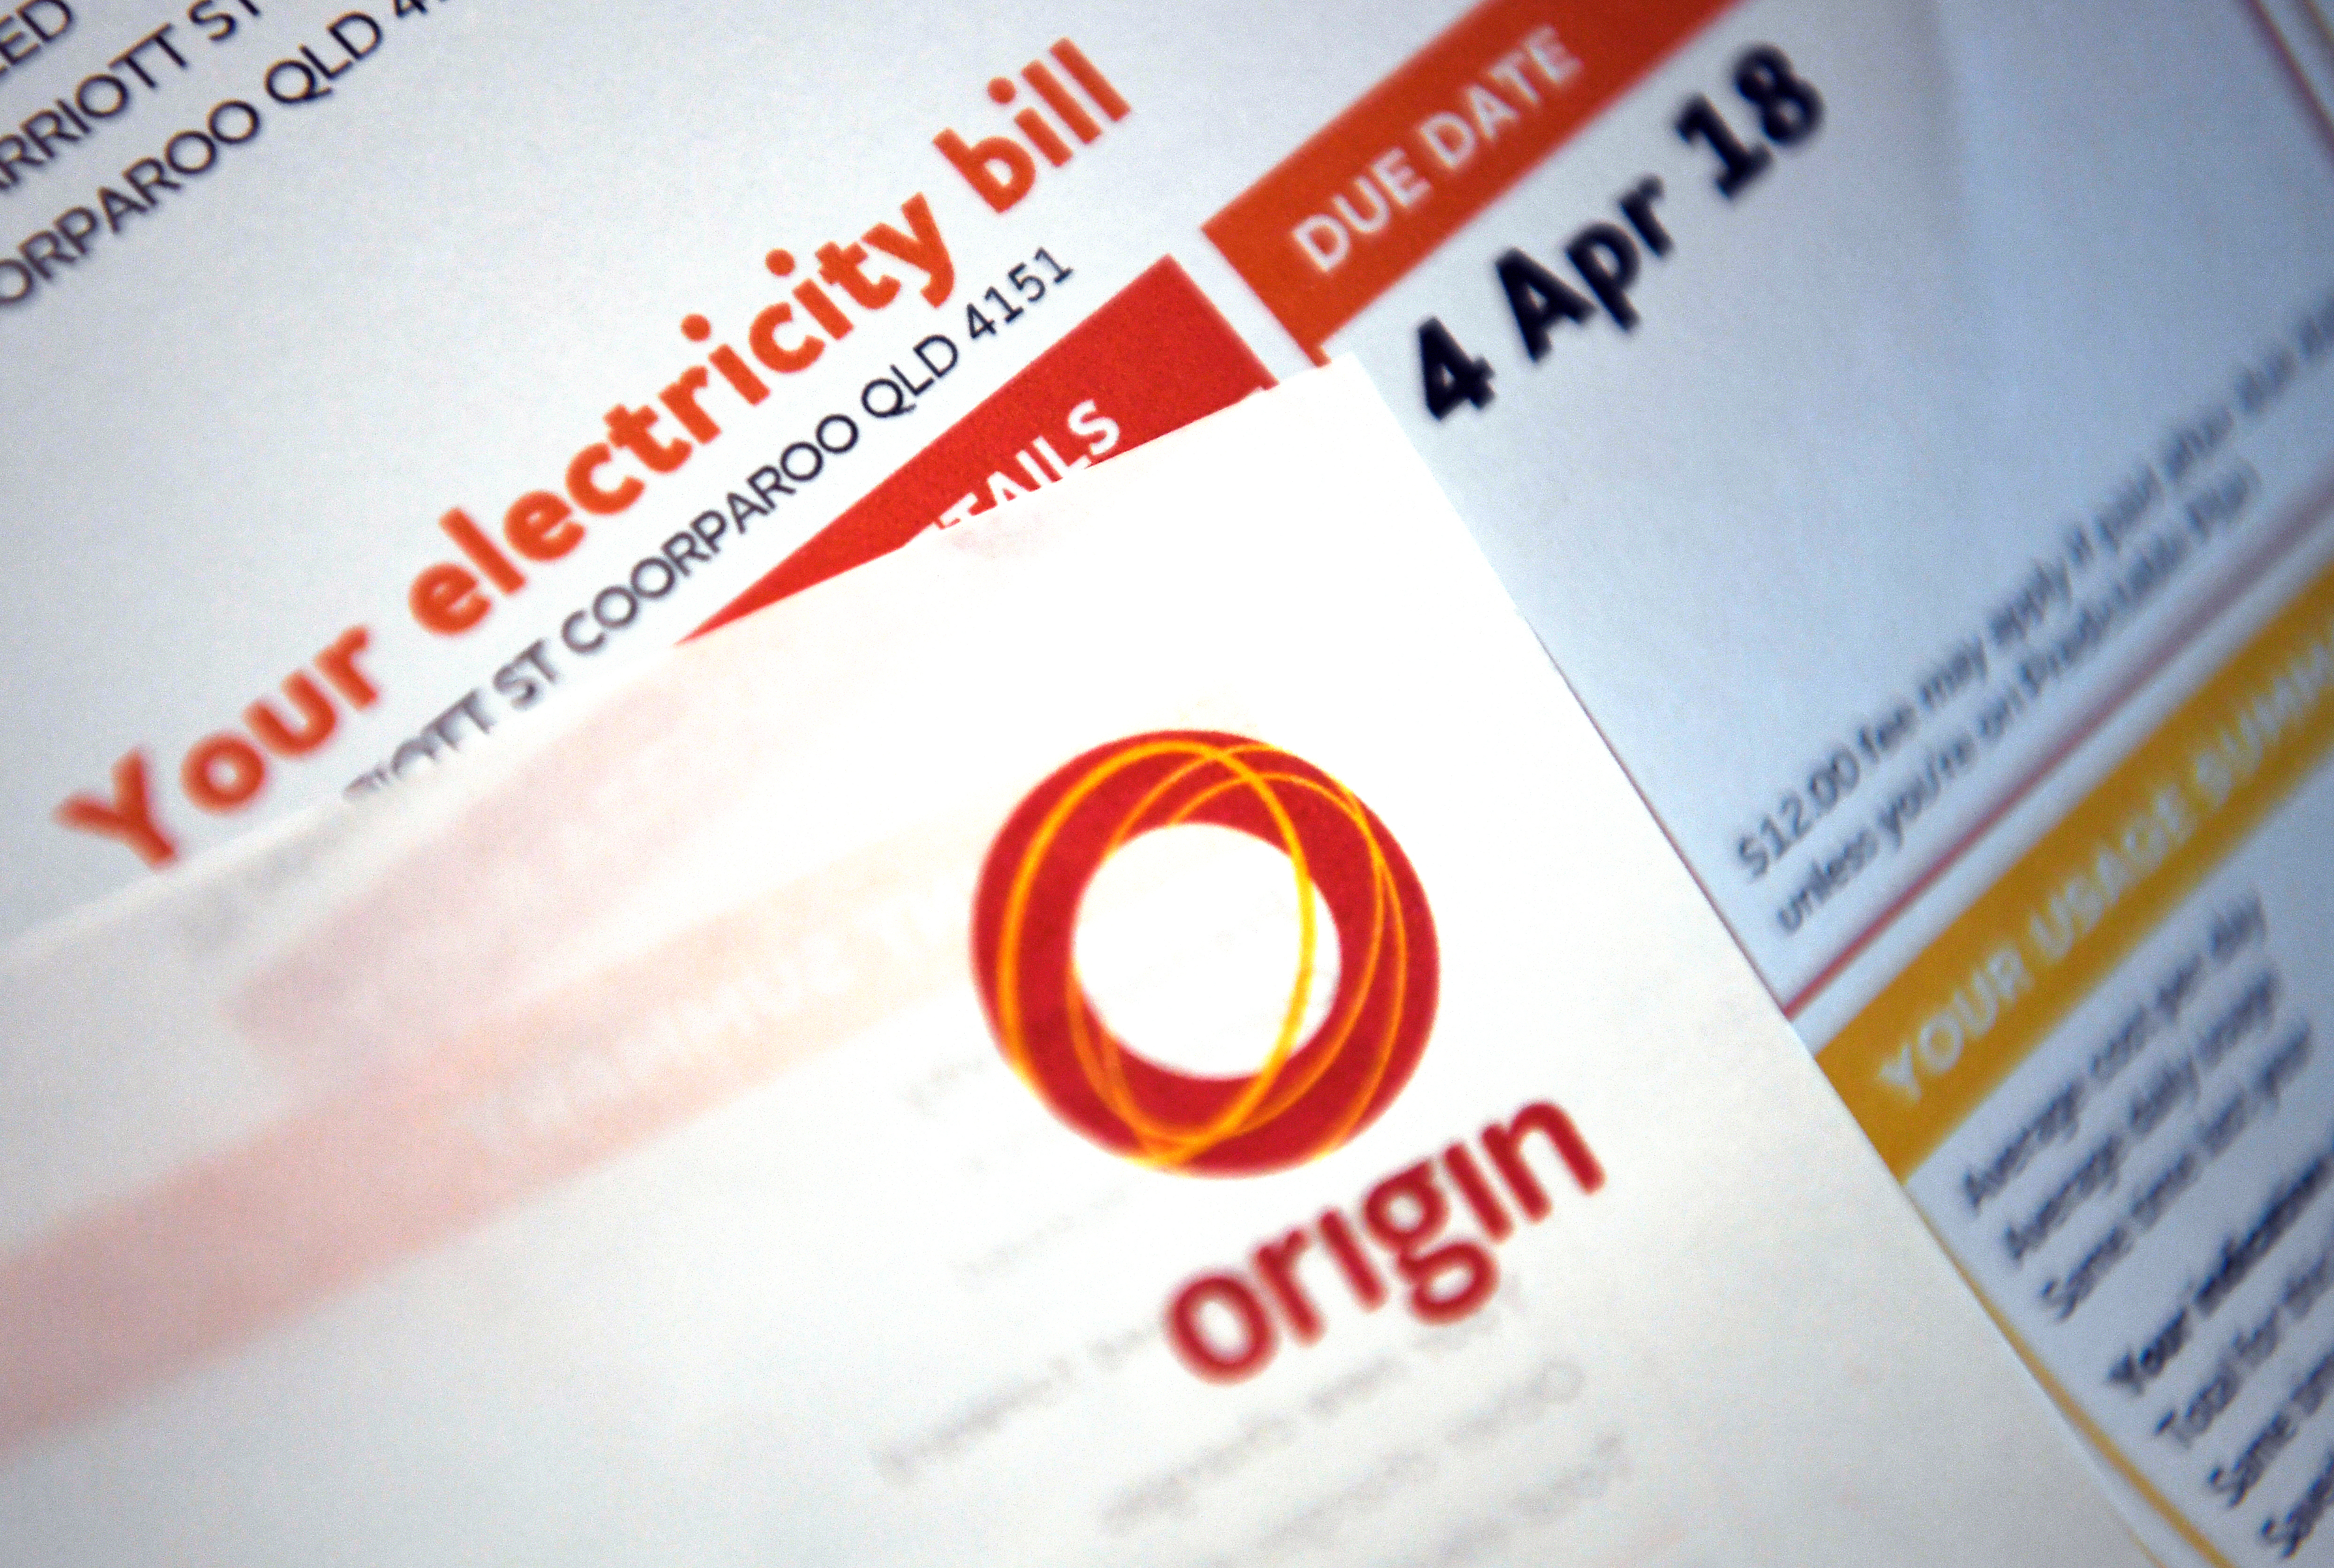 9Saver has secured massive discounts from Origin Energy.